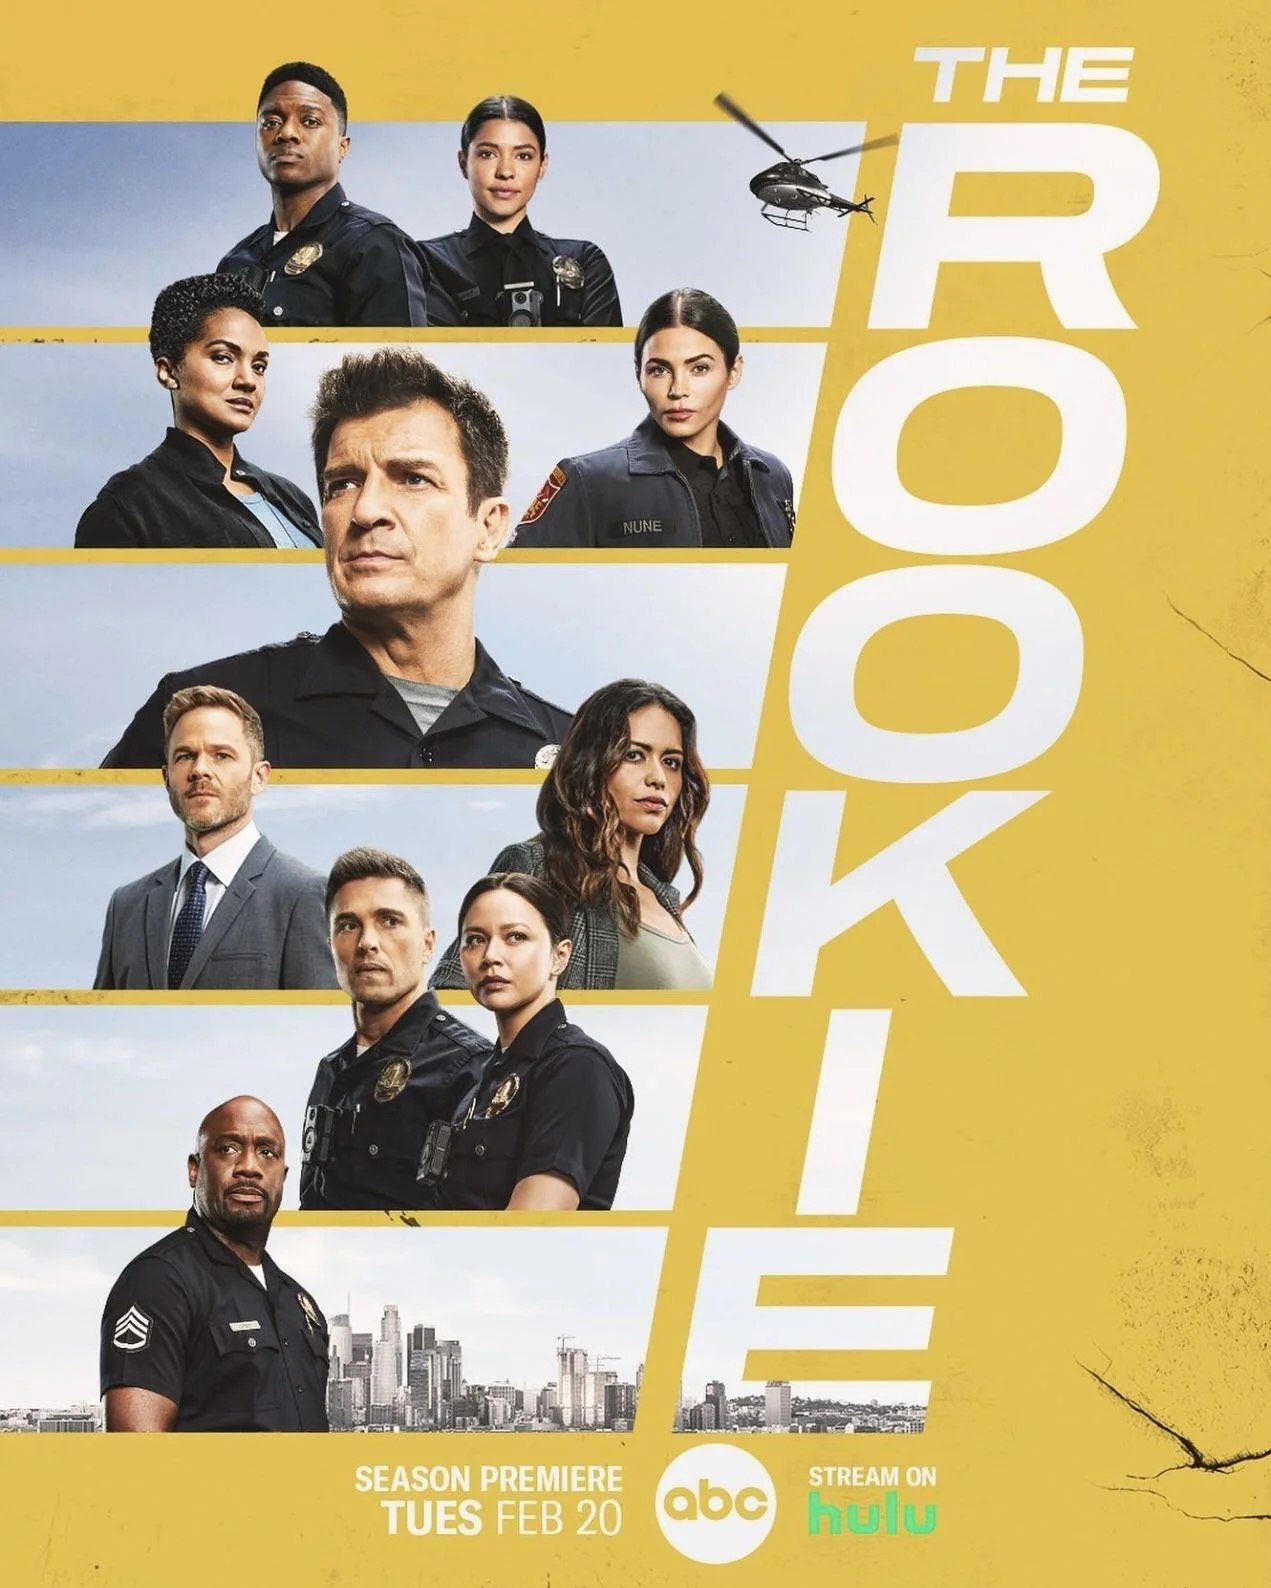 Season Seven!! Congrats to our own Melissa O'Neil and the cast of @therookieabc on their renewal for a seventh season. We can't wait to see Officer Chen and the rest of the team in action as their stories continue to unfold through the next season!